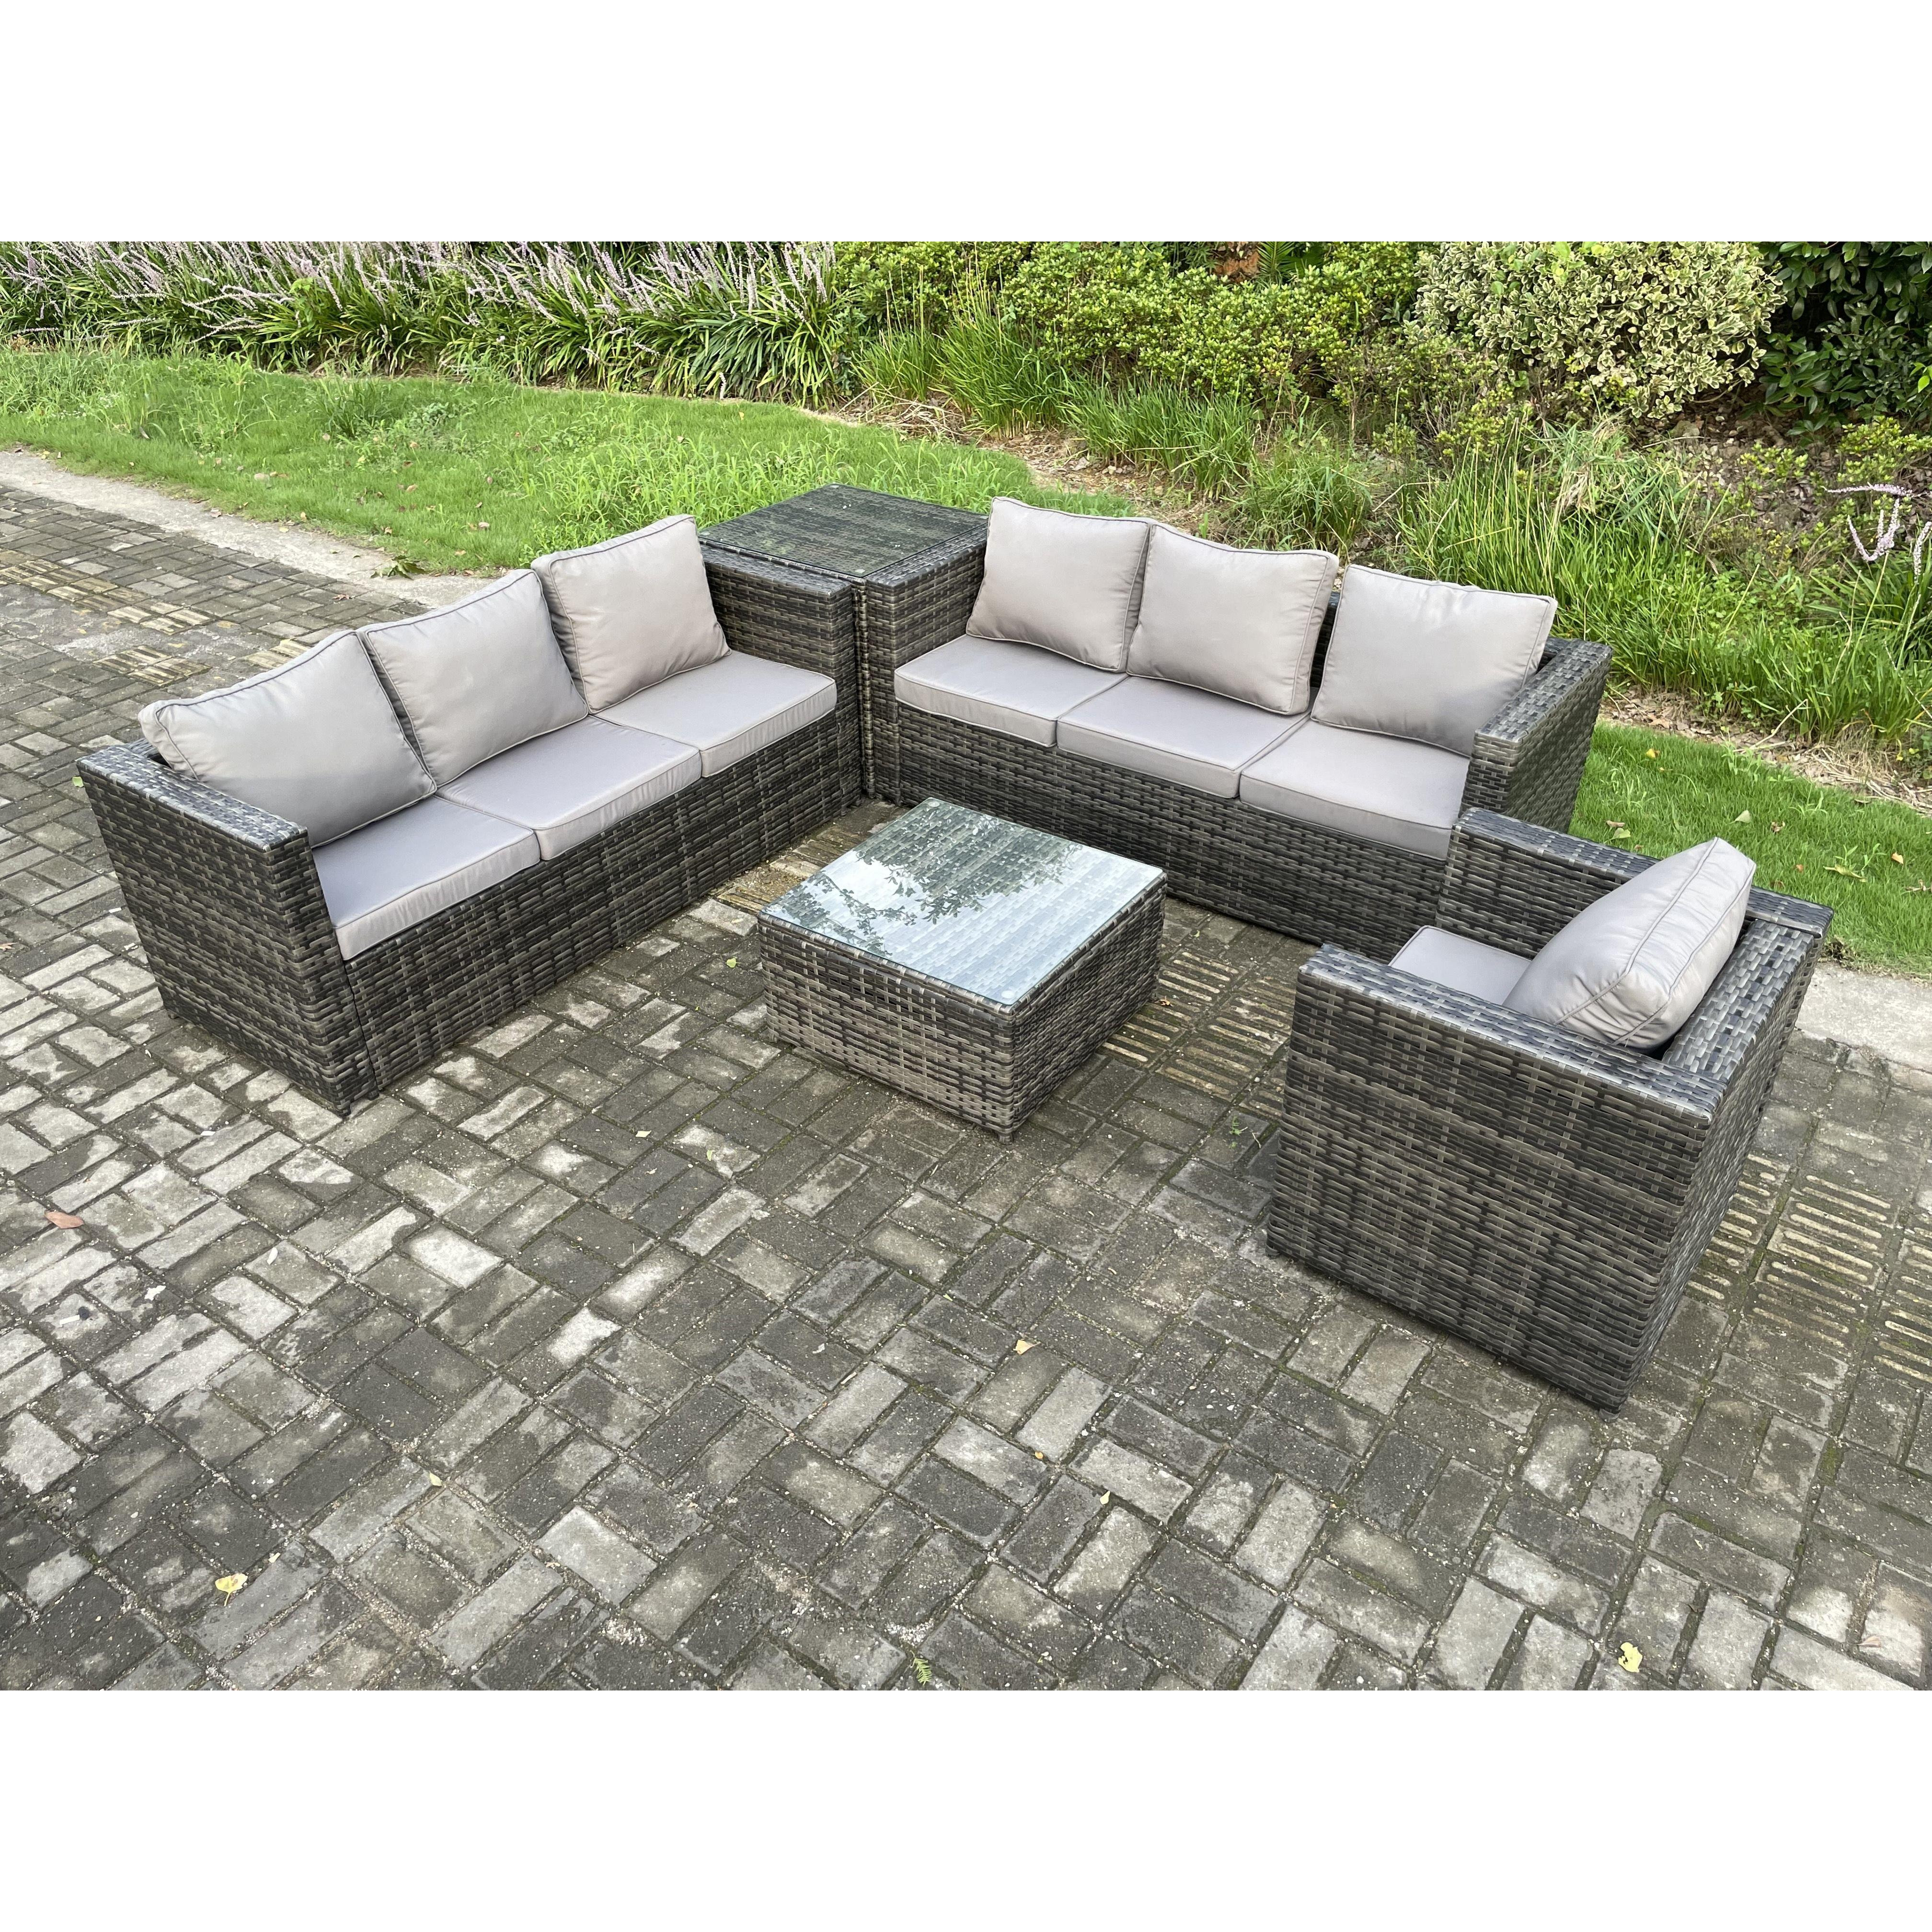 Rattan Garden Furniture Sofa Set with Armchair Square Coffee Table Side Table Indoor Outdoor 7 Seater Rattan Set - image 1